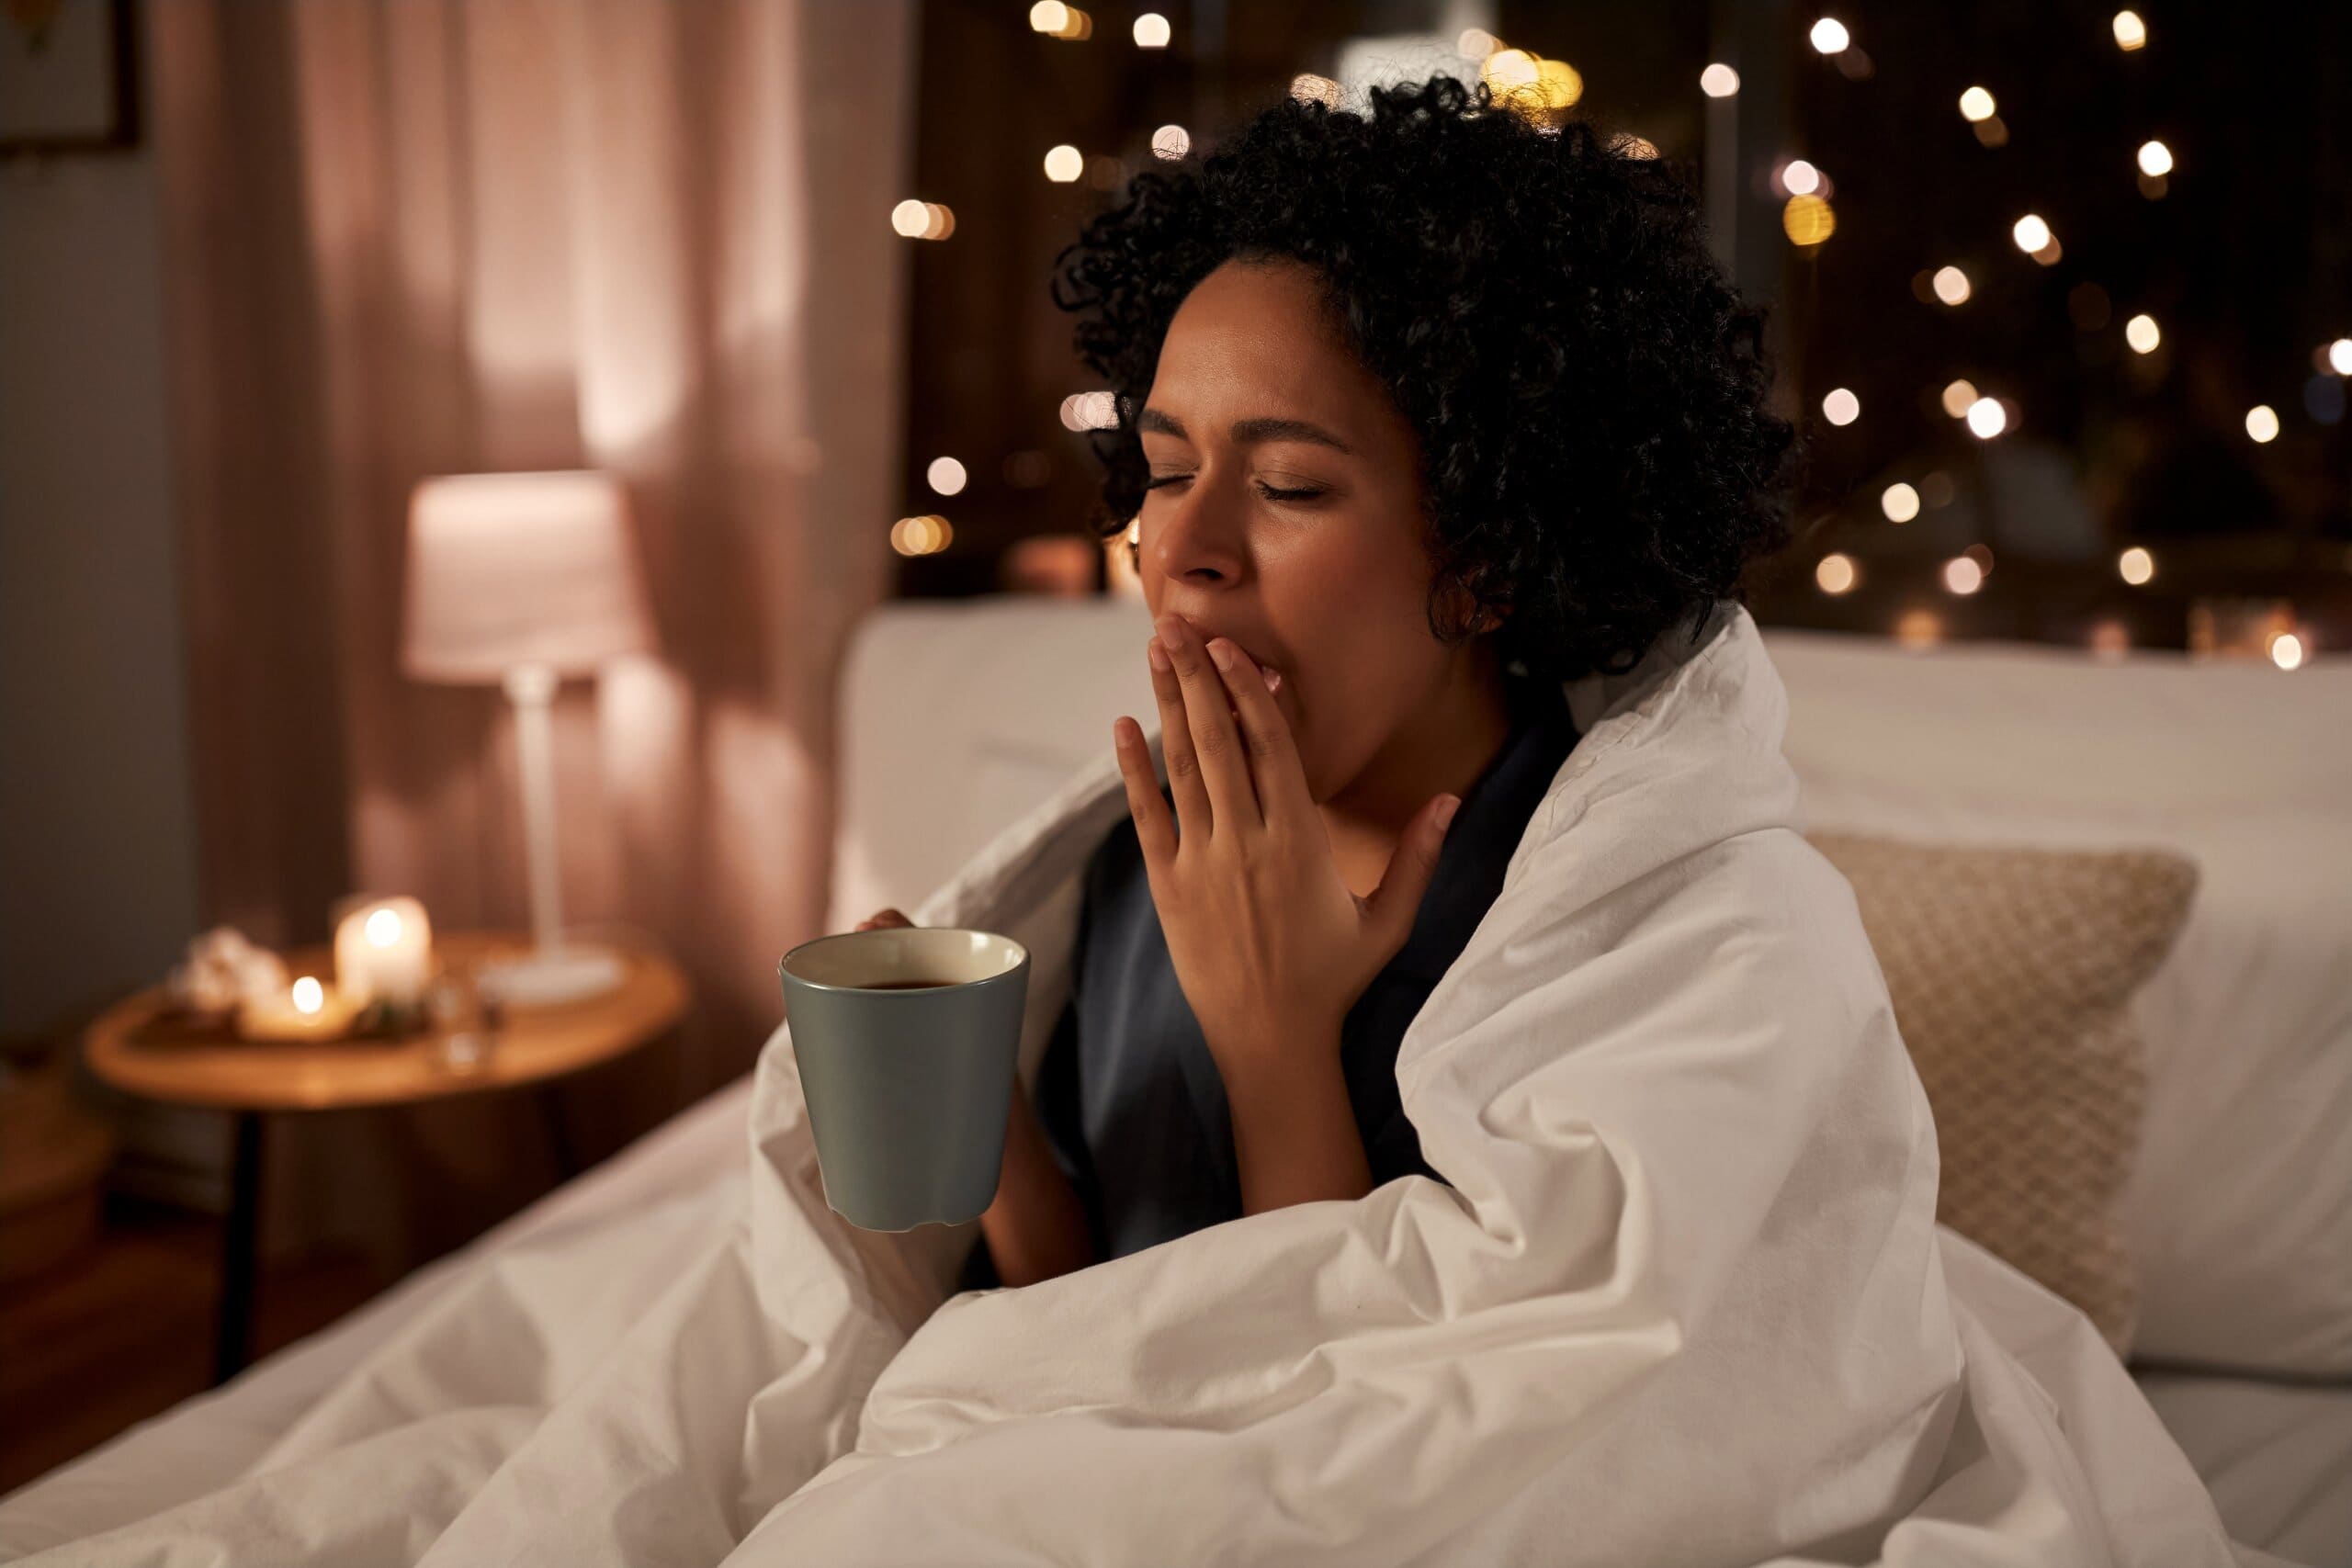 Woman sat up in bed holding a hot drink, yawning.